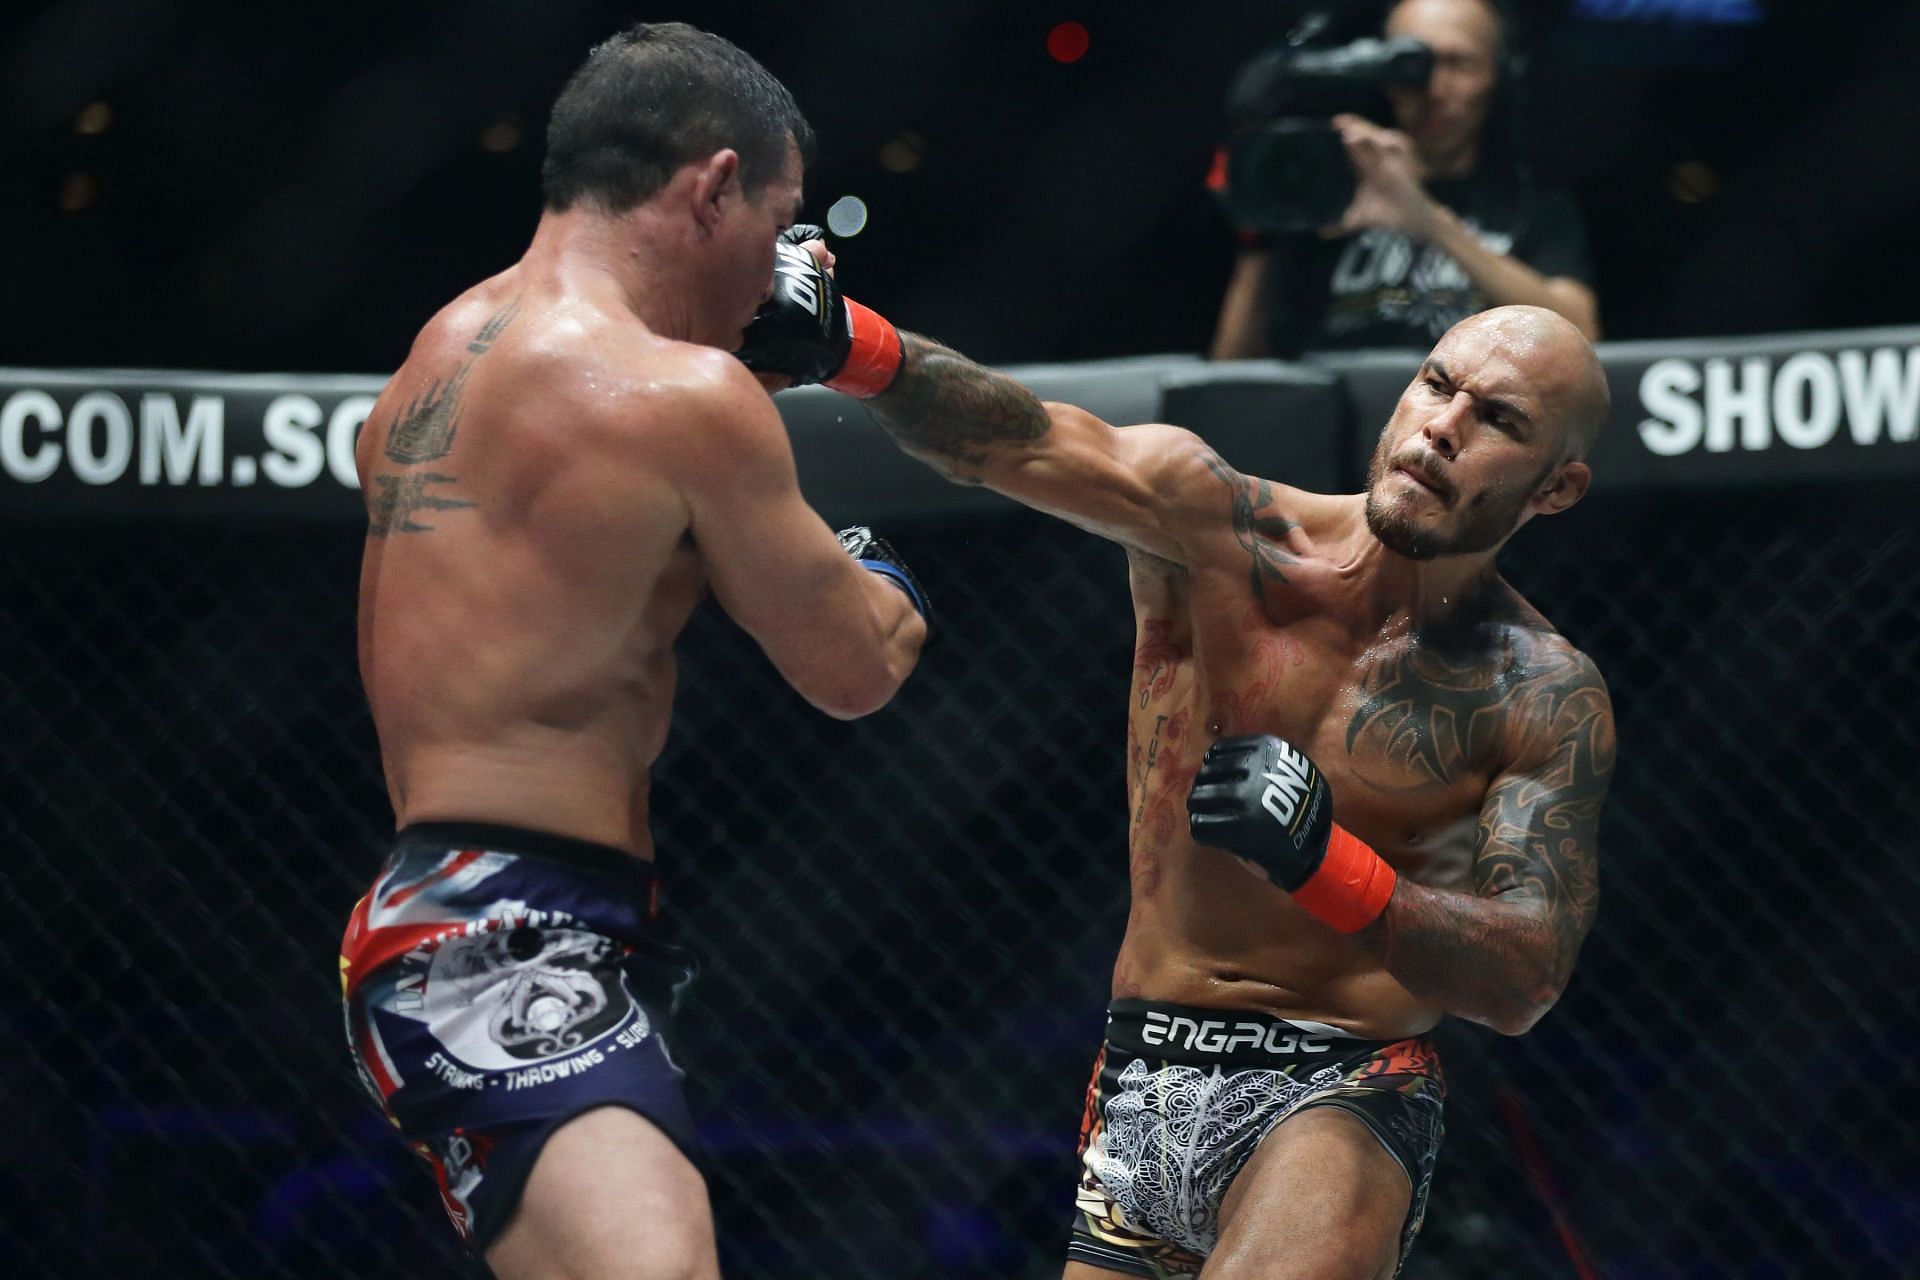 Roger Huerta (right) was involved in a wild altercation with a former NFL star in 2010